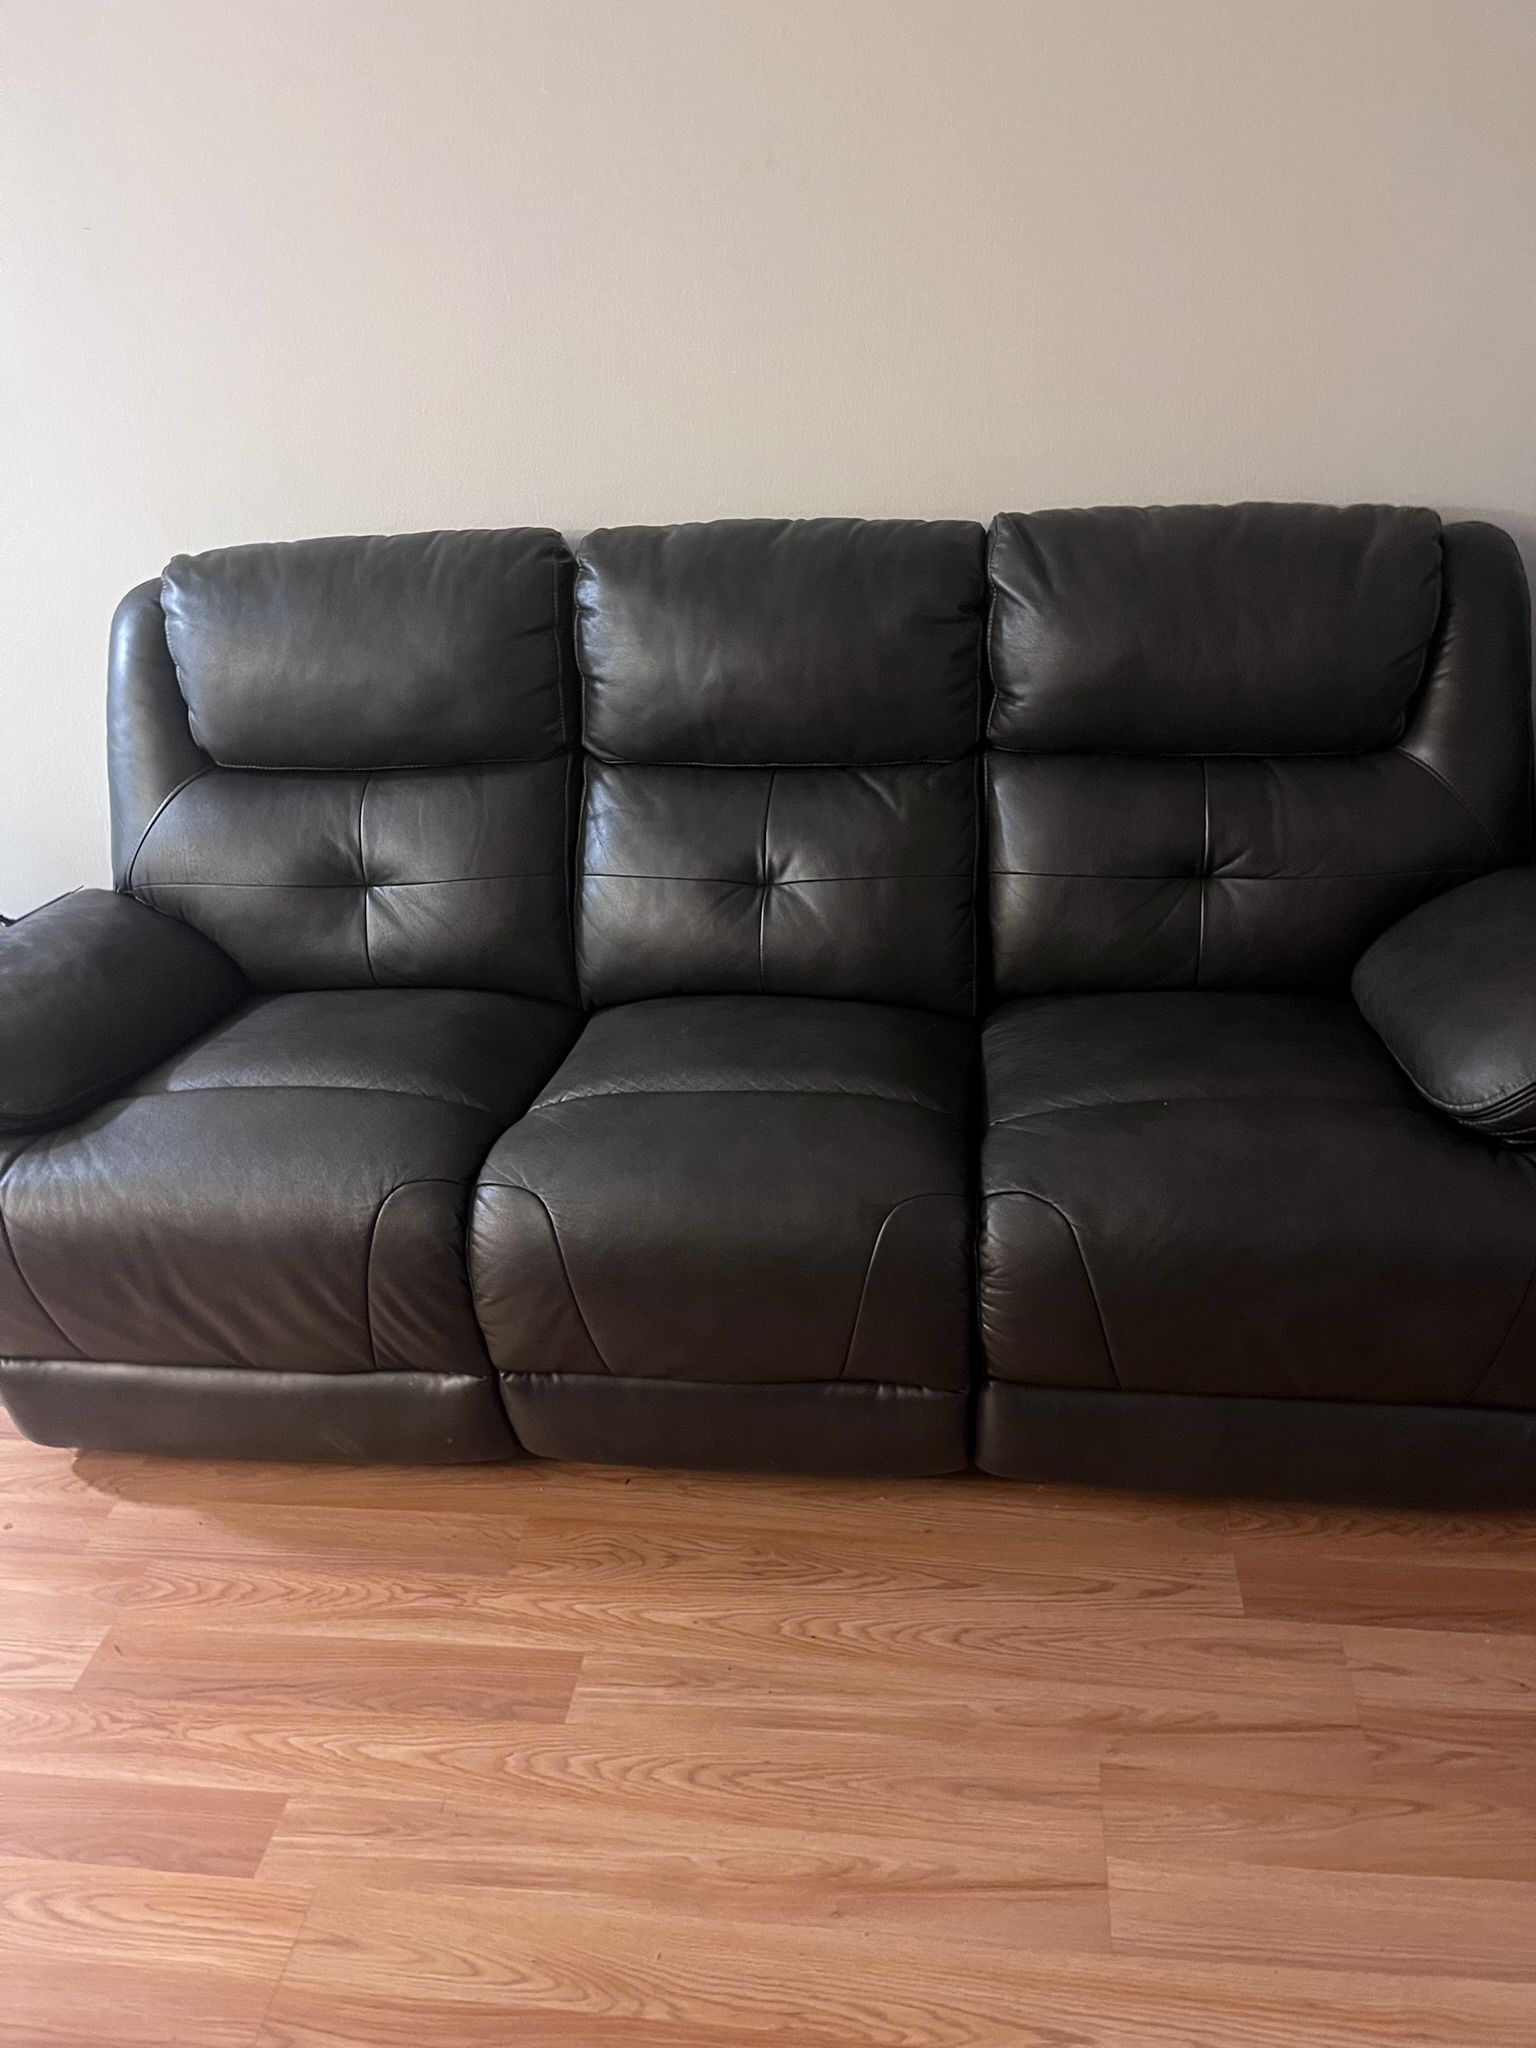 2 Piece Recliner Couch Set